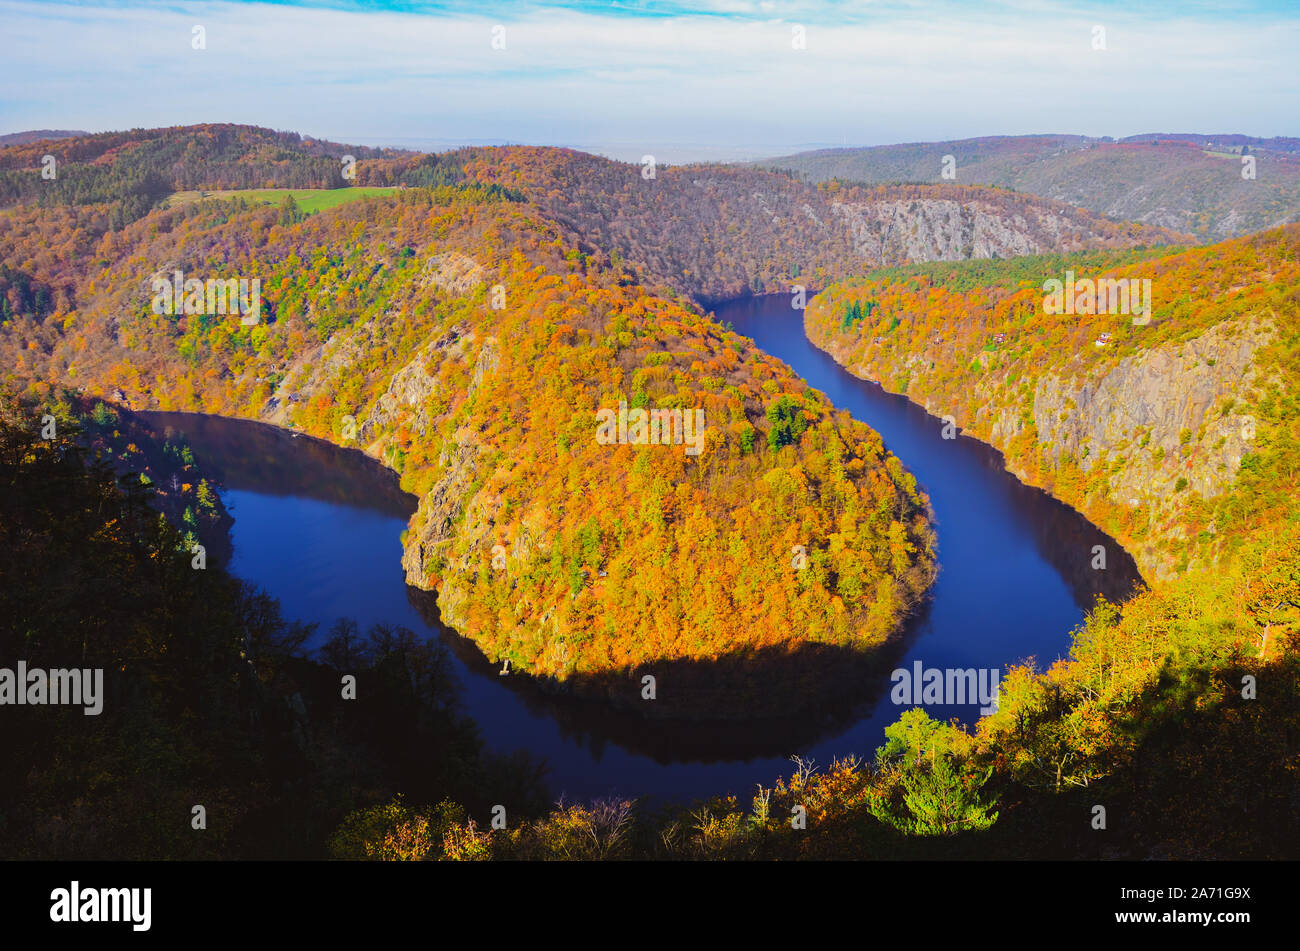 Beautiful Vyhlidka Maj, Lookout Maj, near Teletin, Czech Republic. Meander of the river Vltava surrounded by colorful autumn forest viewed from above. Tourist attraction in Czech landscape. Czechia. Stock Photo